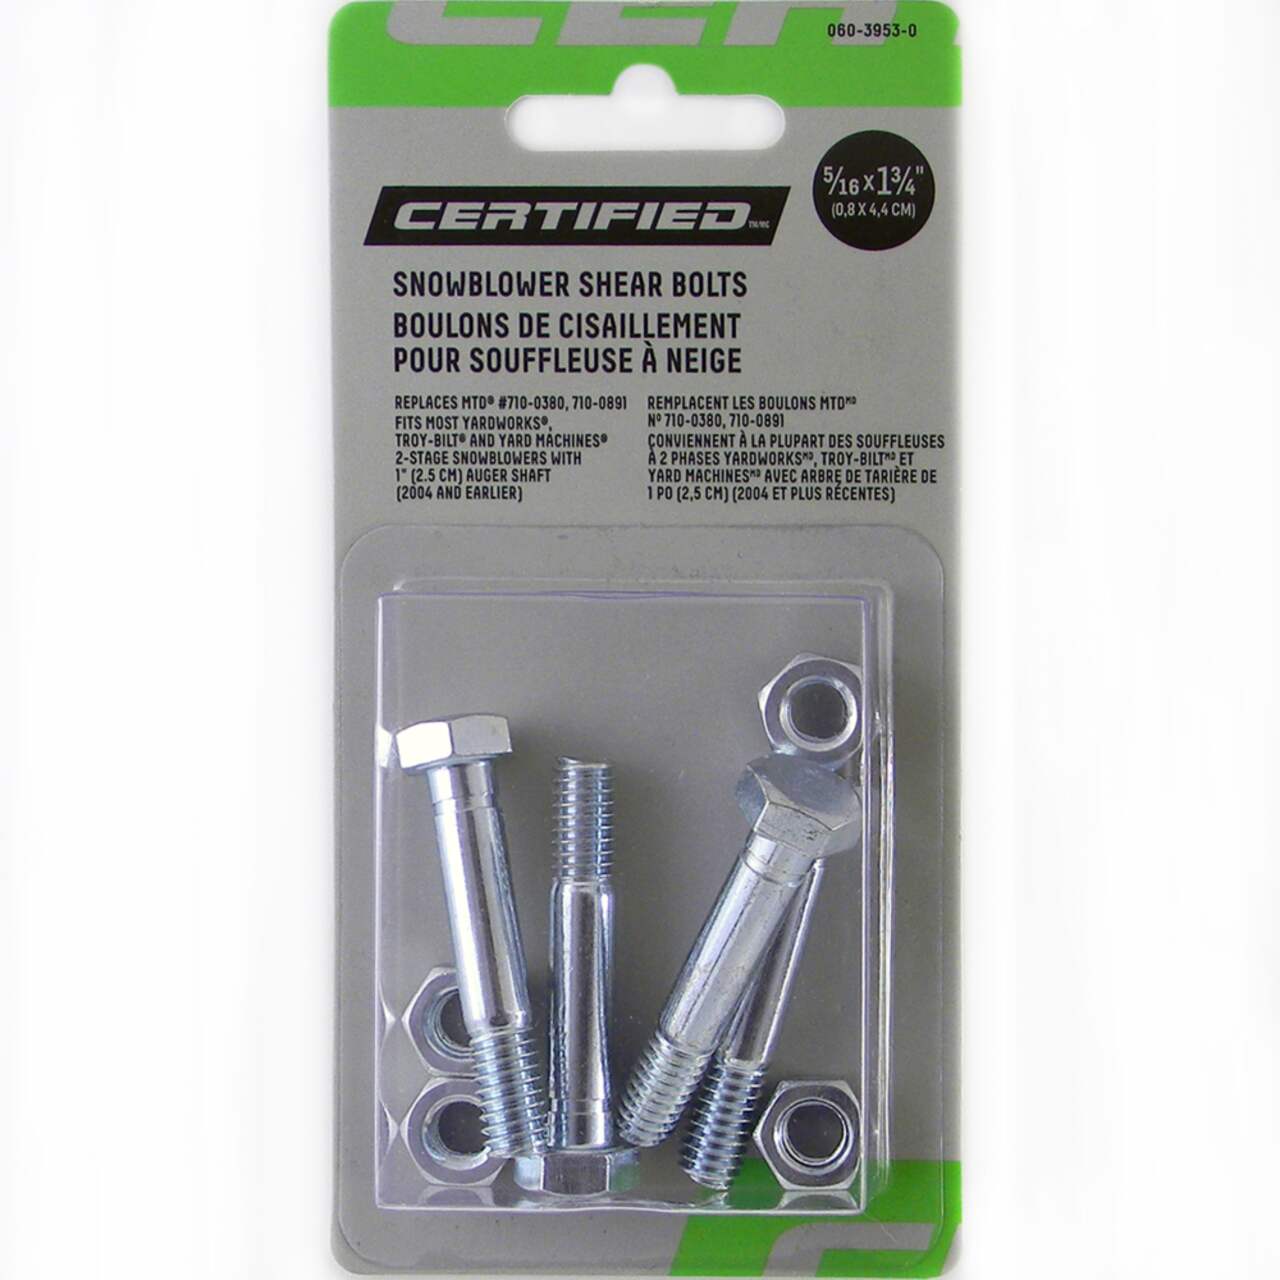 Certified Snowblower Replacement Shear Pins, 4 Pk. Incl. cotter Pins, 1/4 x  1.75-in